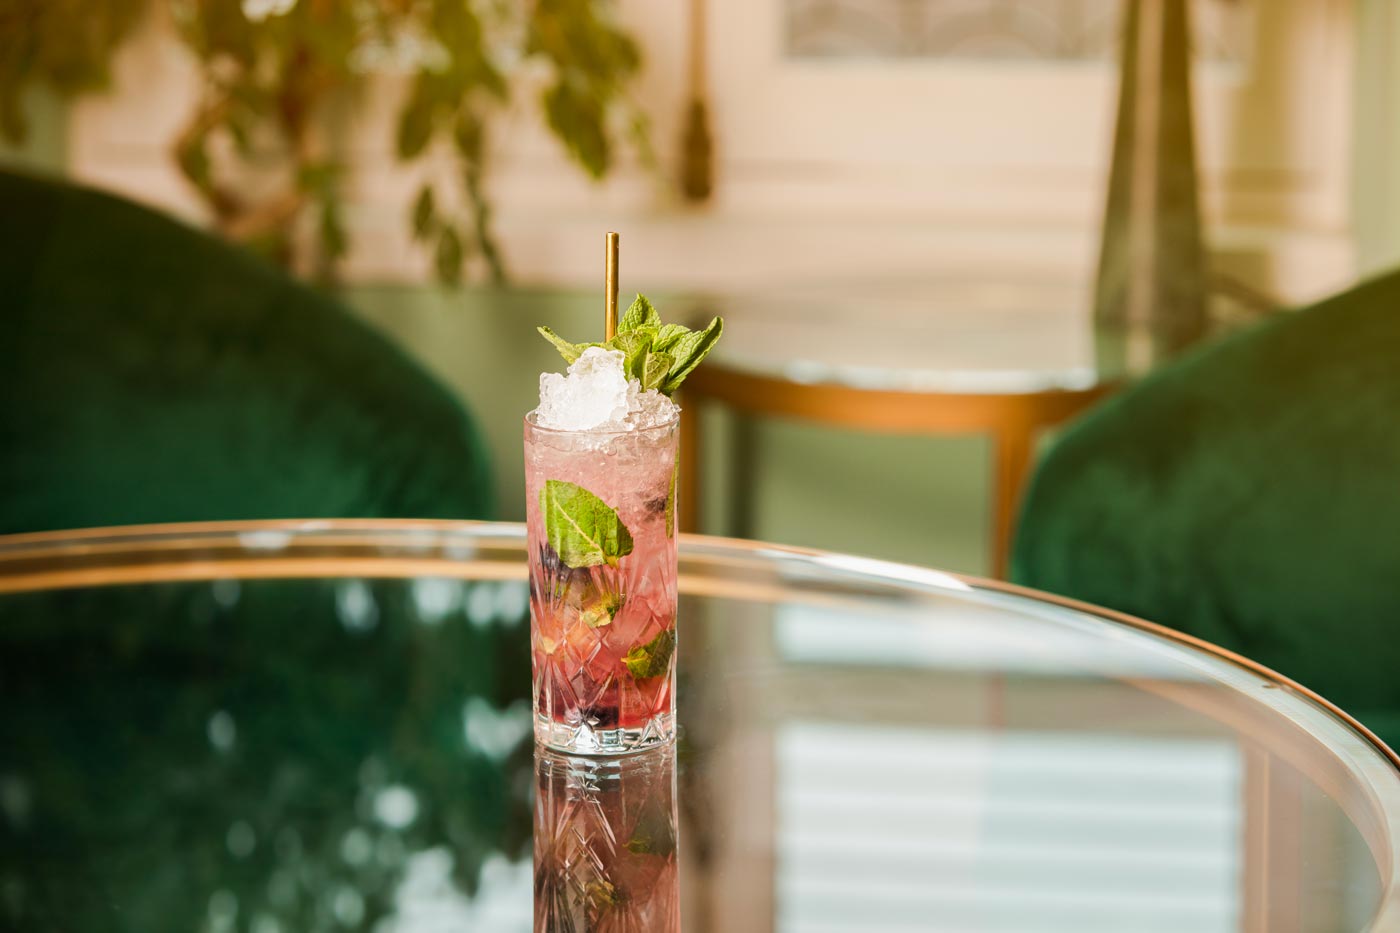 A tall glass is on a glass table. The glass contains a pink coloured drink and mint leaves. In the background we can see dark green velvet chairs and the egde of a large plant.